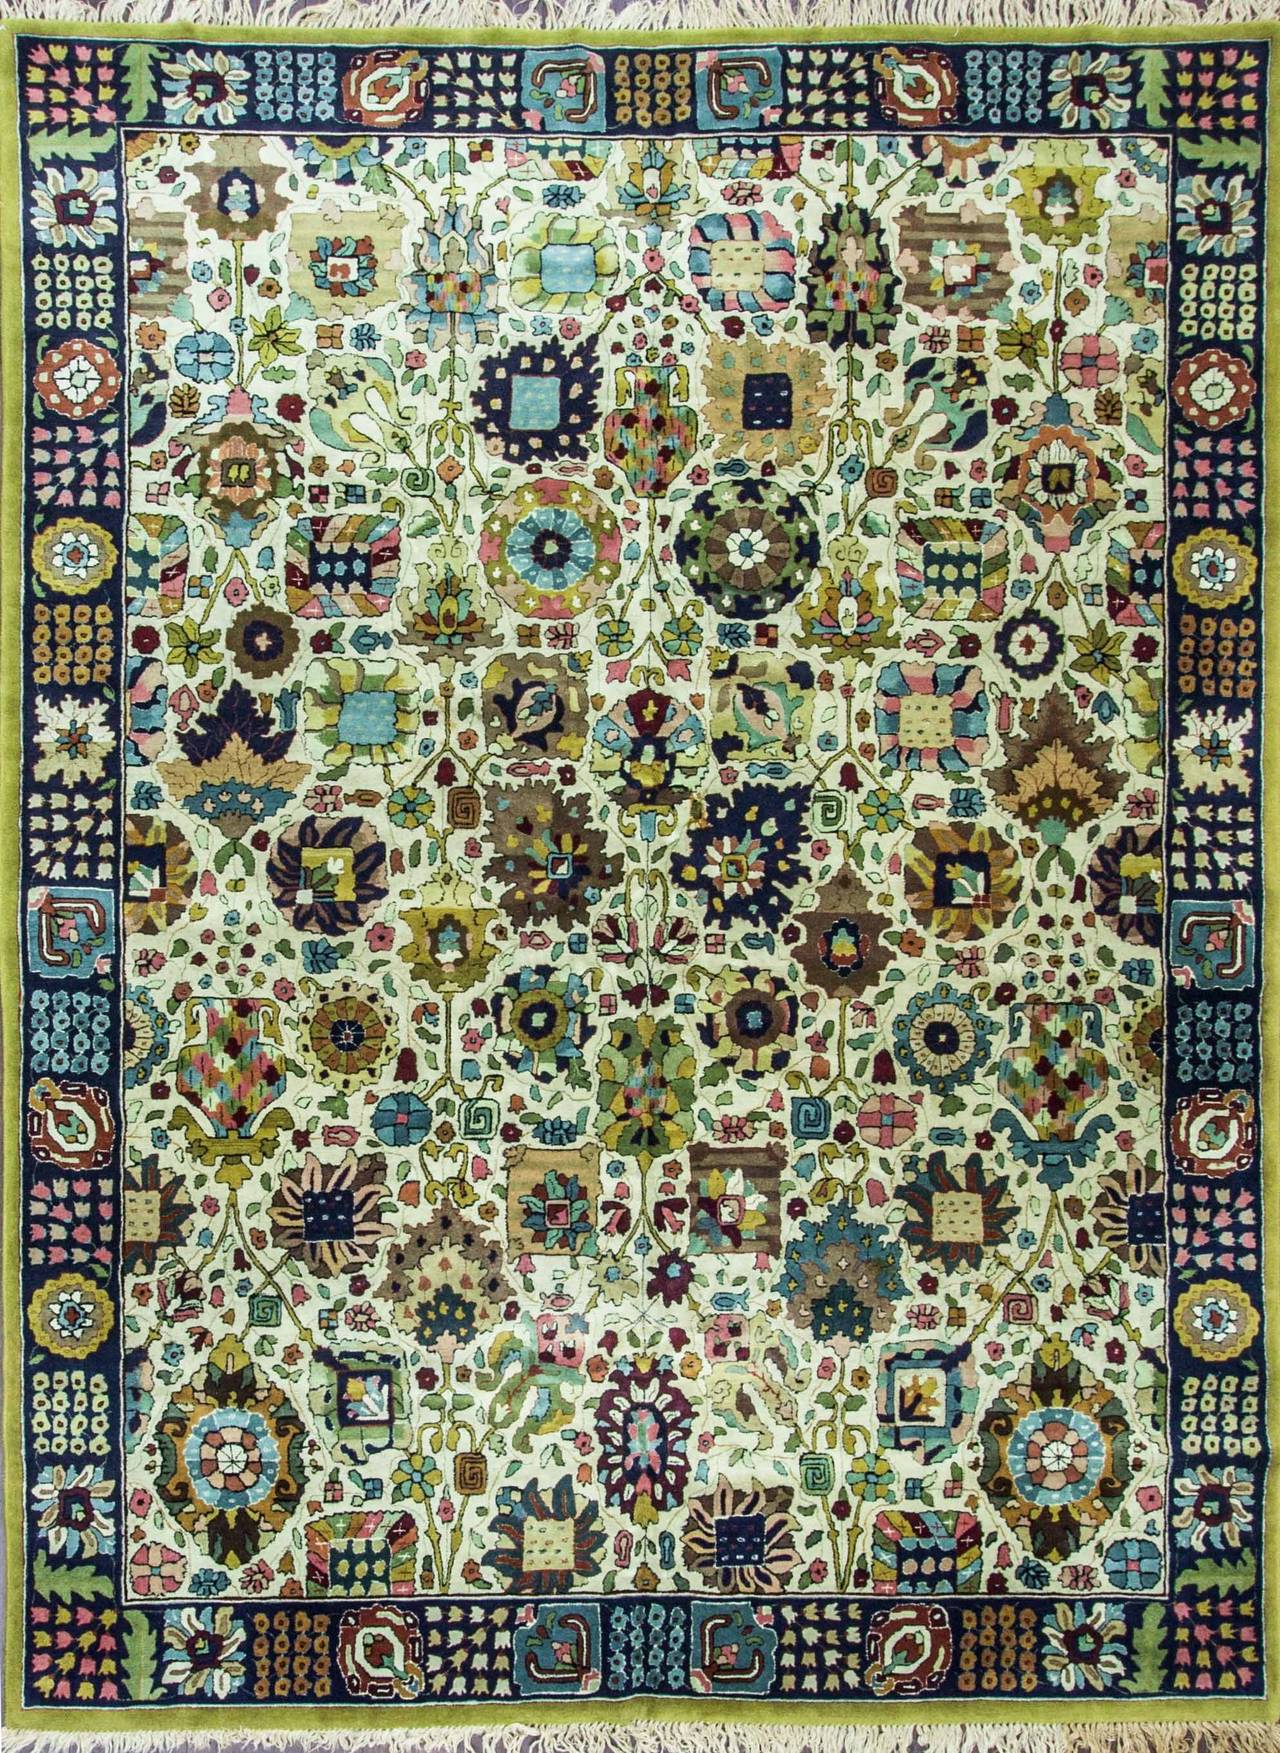 The merchants decided to make the Persian and Caucasian design in Europe, some started in Germany which is called Tetex. The Germans mostly did geometric designs such as Persian Tabriz and Sultanabad, Heriz, Serapi, some Bokhara and